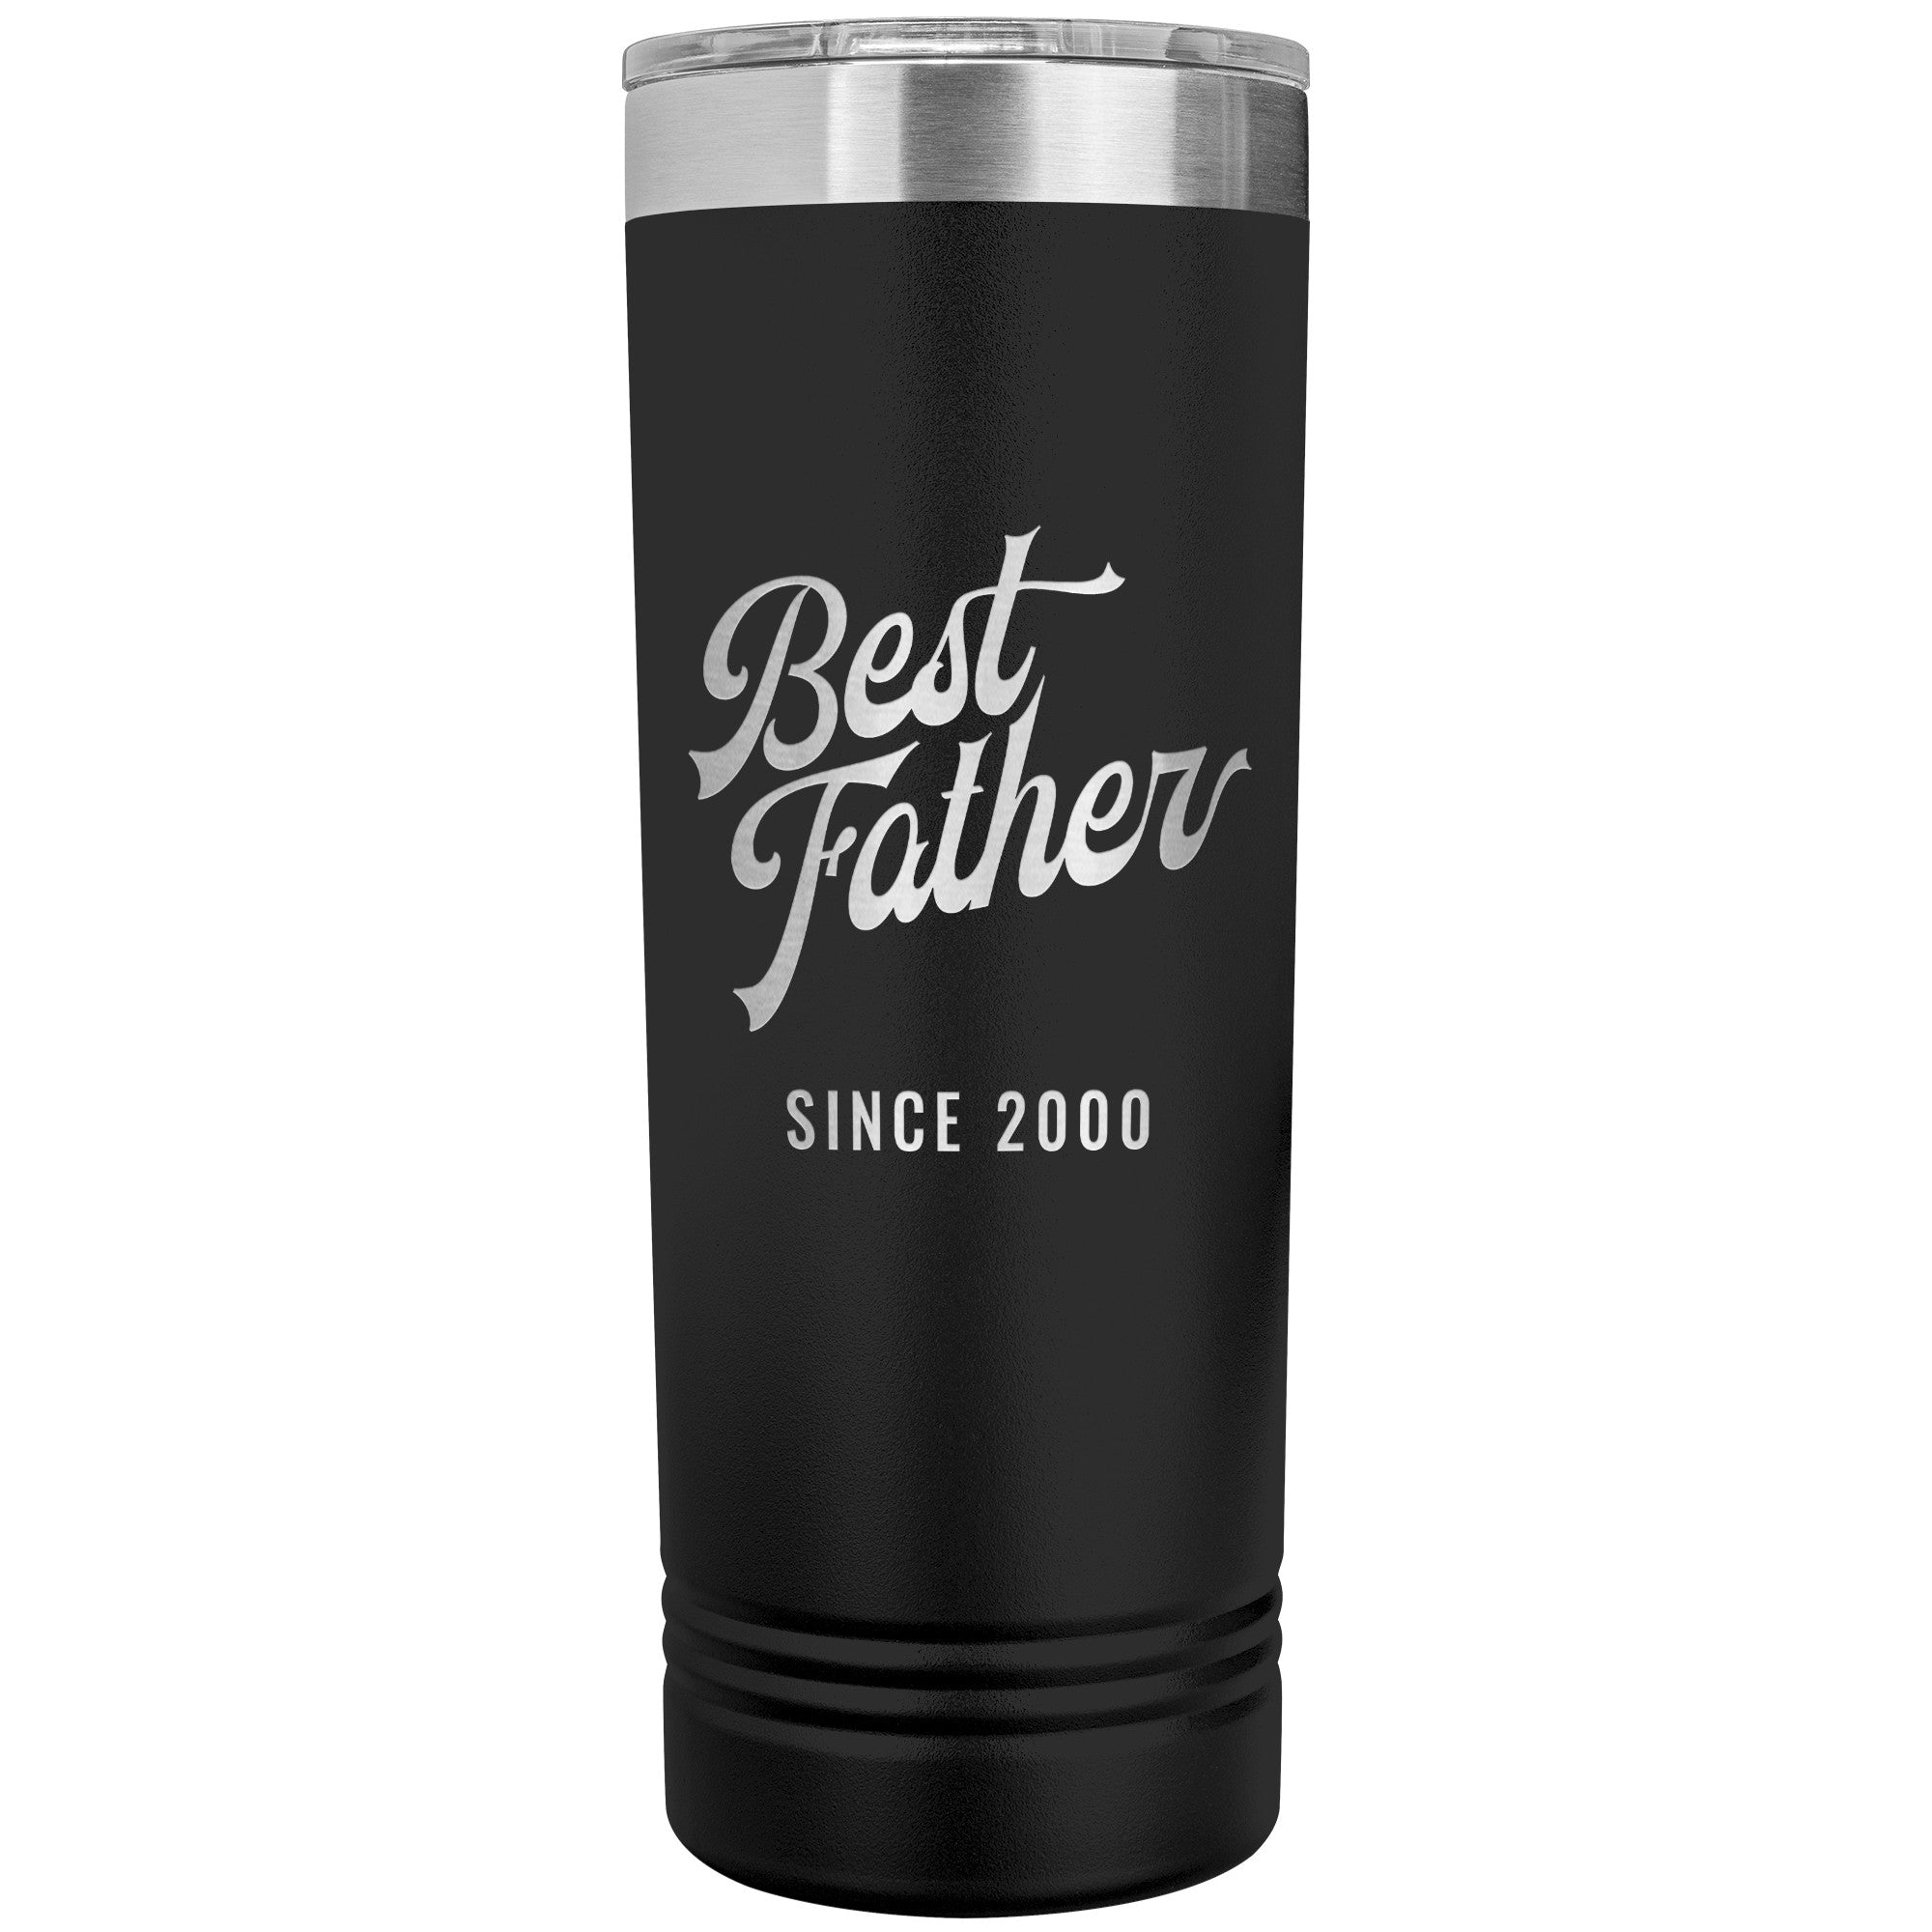 Best Father Since 2000 - 22oz Insulated Skinny Tumbler